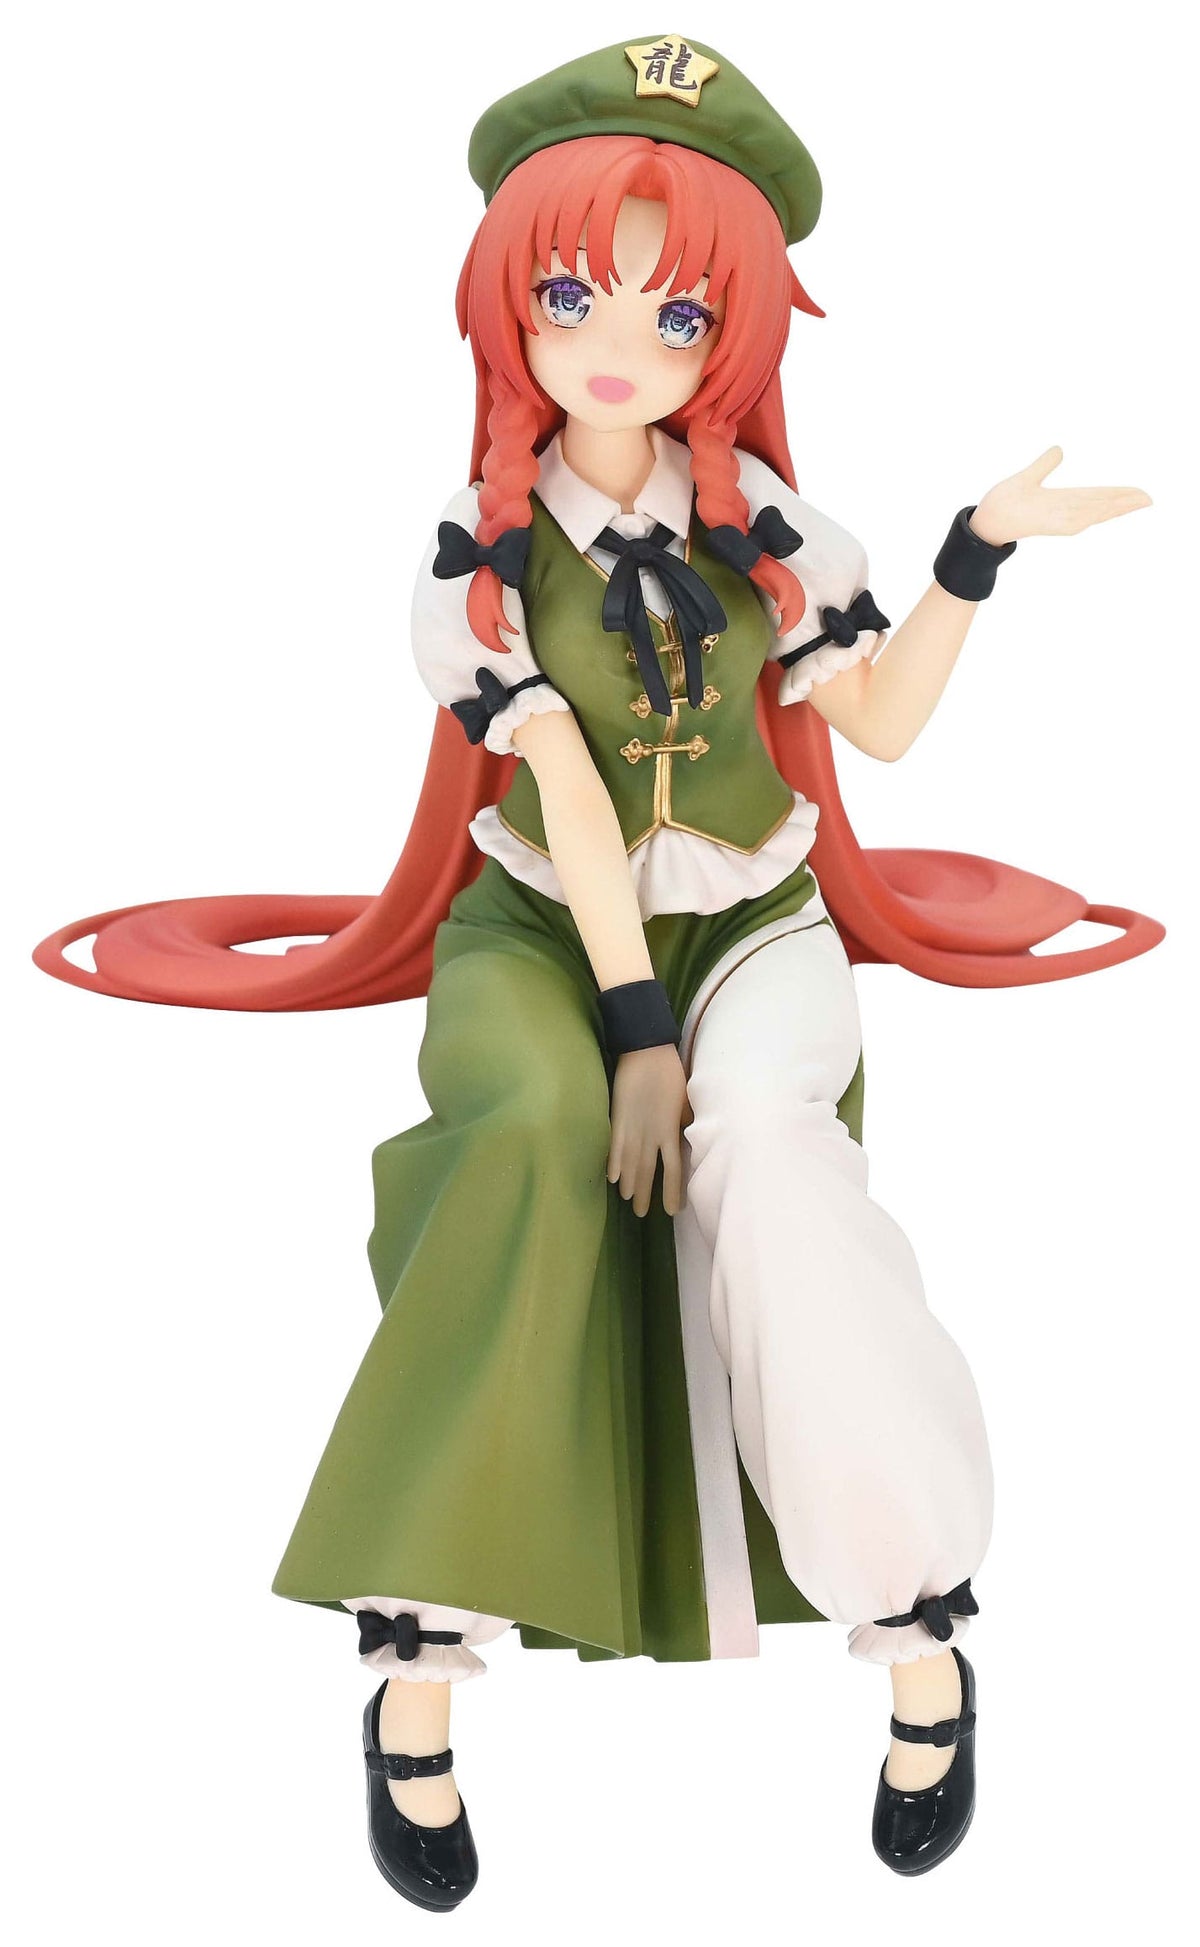 Touhou Project - Hong Meiling - Noodle Stopper Figure (FuryU)